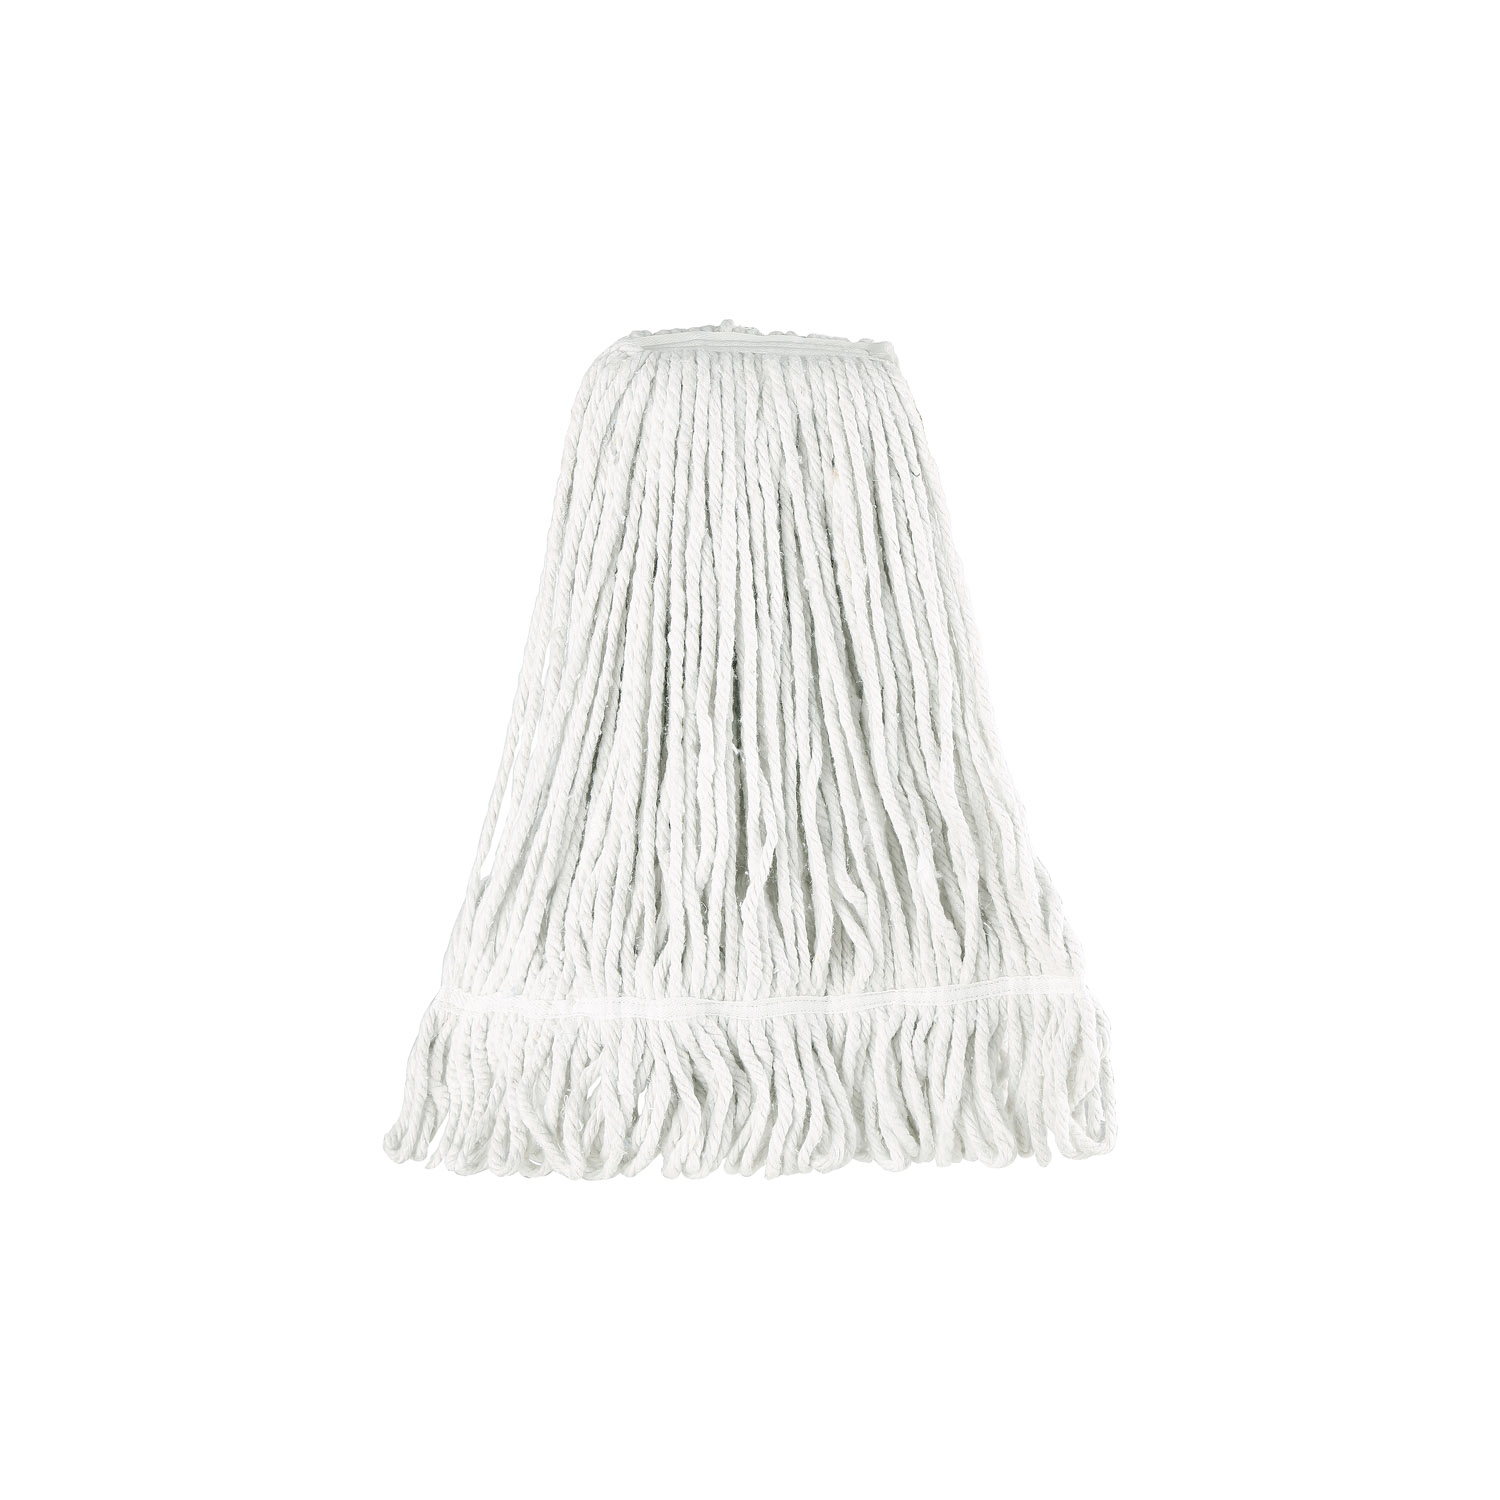 CAC China MHD2-32WT Cotton Mop Head with Looped-End, White 32 oz.